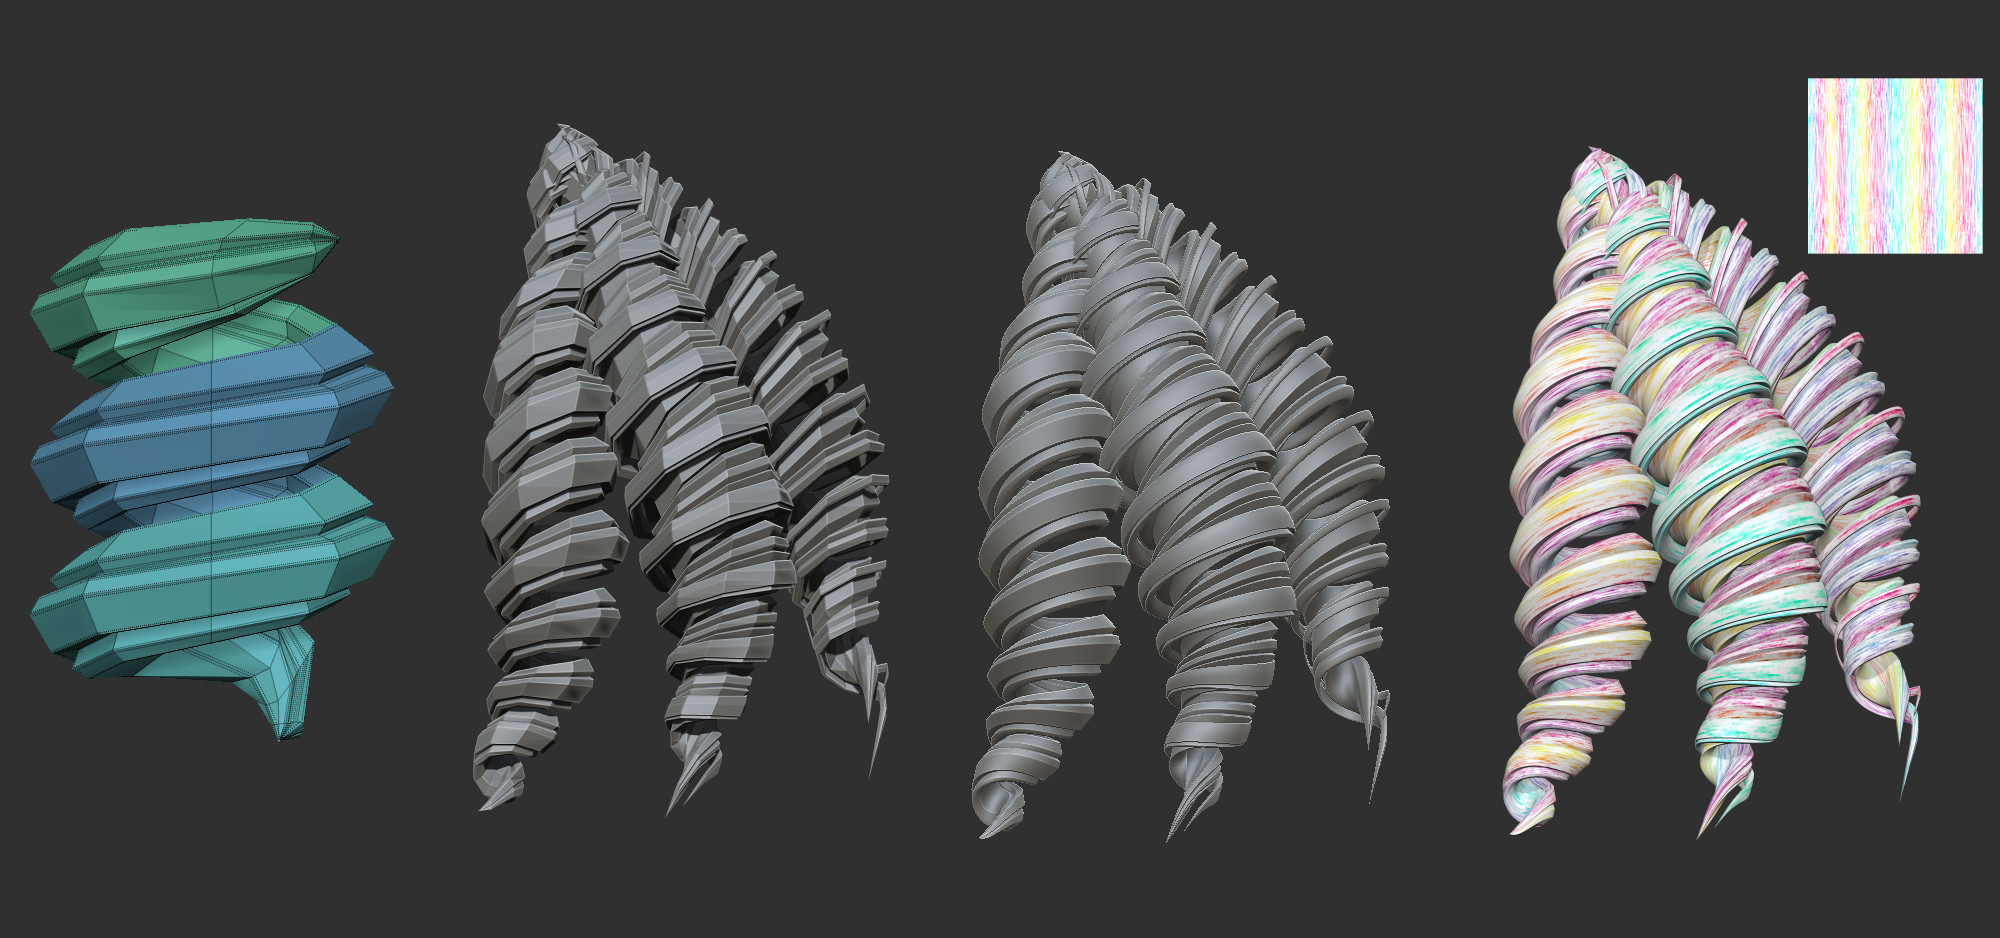 Custom hair brushes I made. Includes creases and UVs!